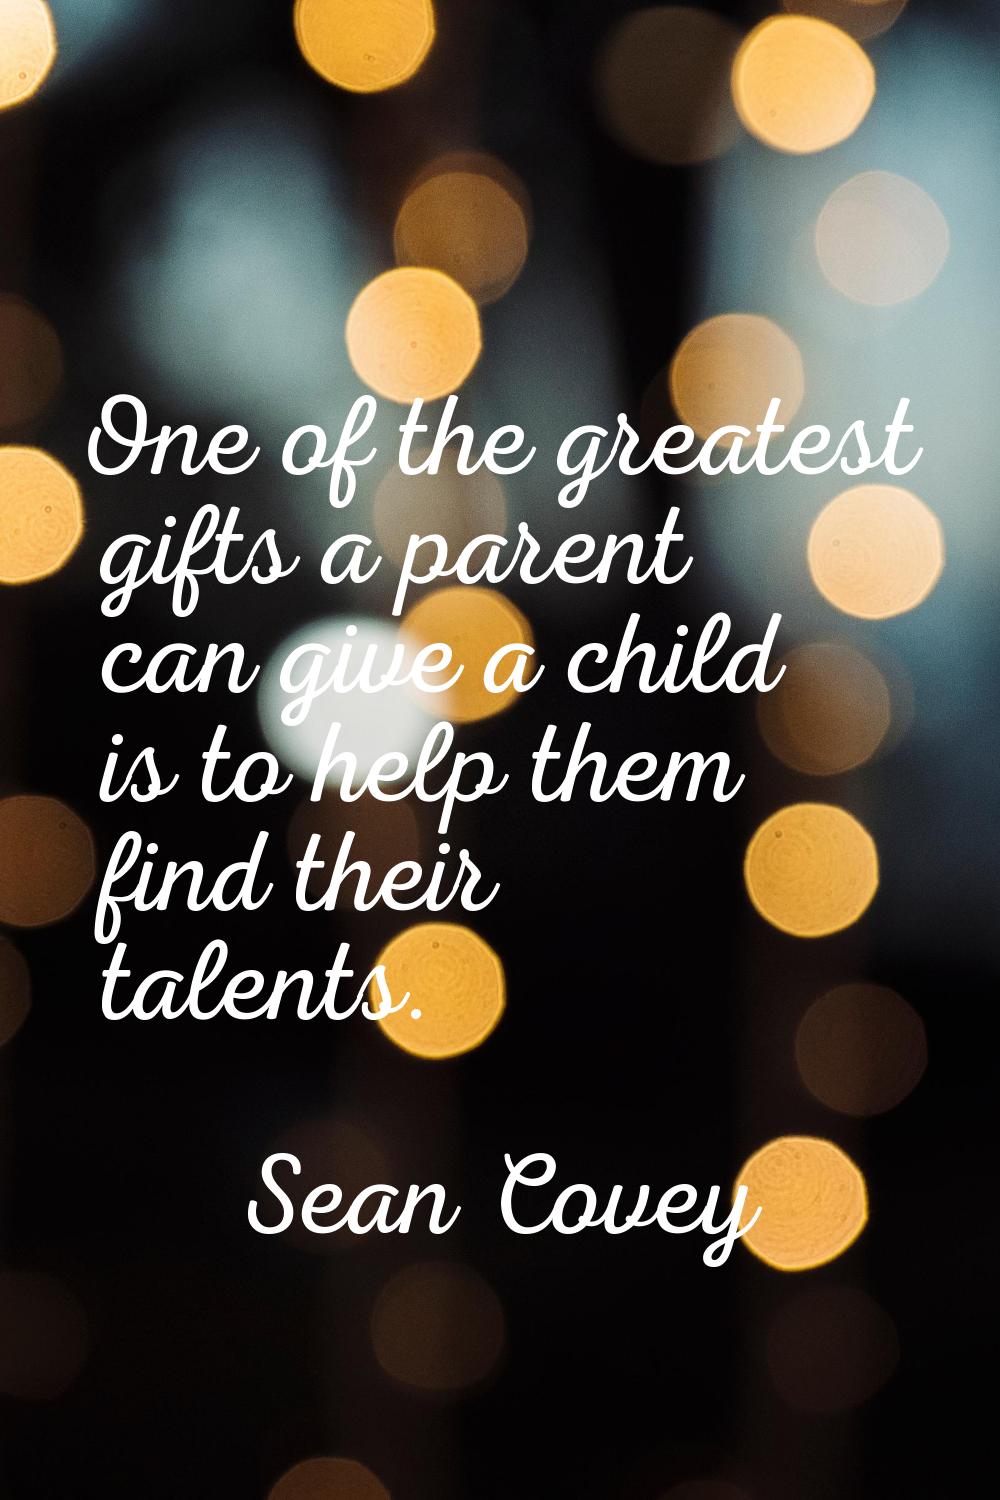 One of the greatest gifts a parent can give a child is to help them find their talents.